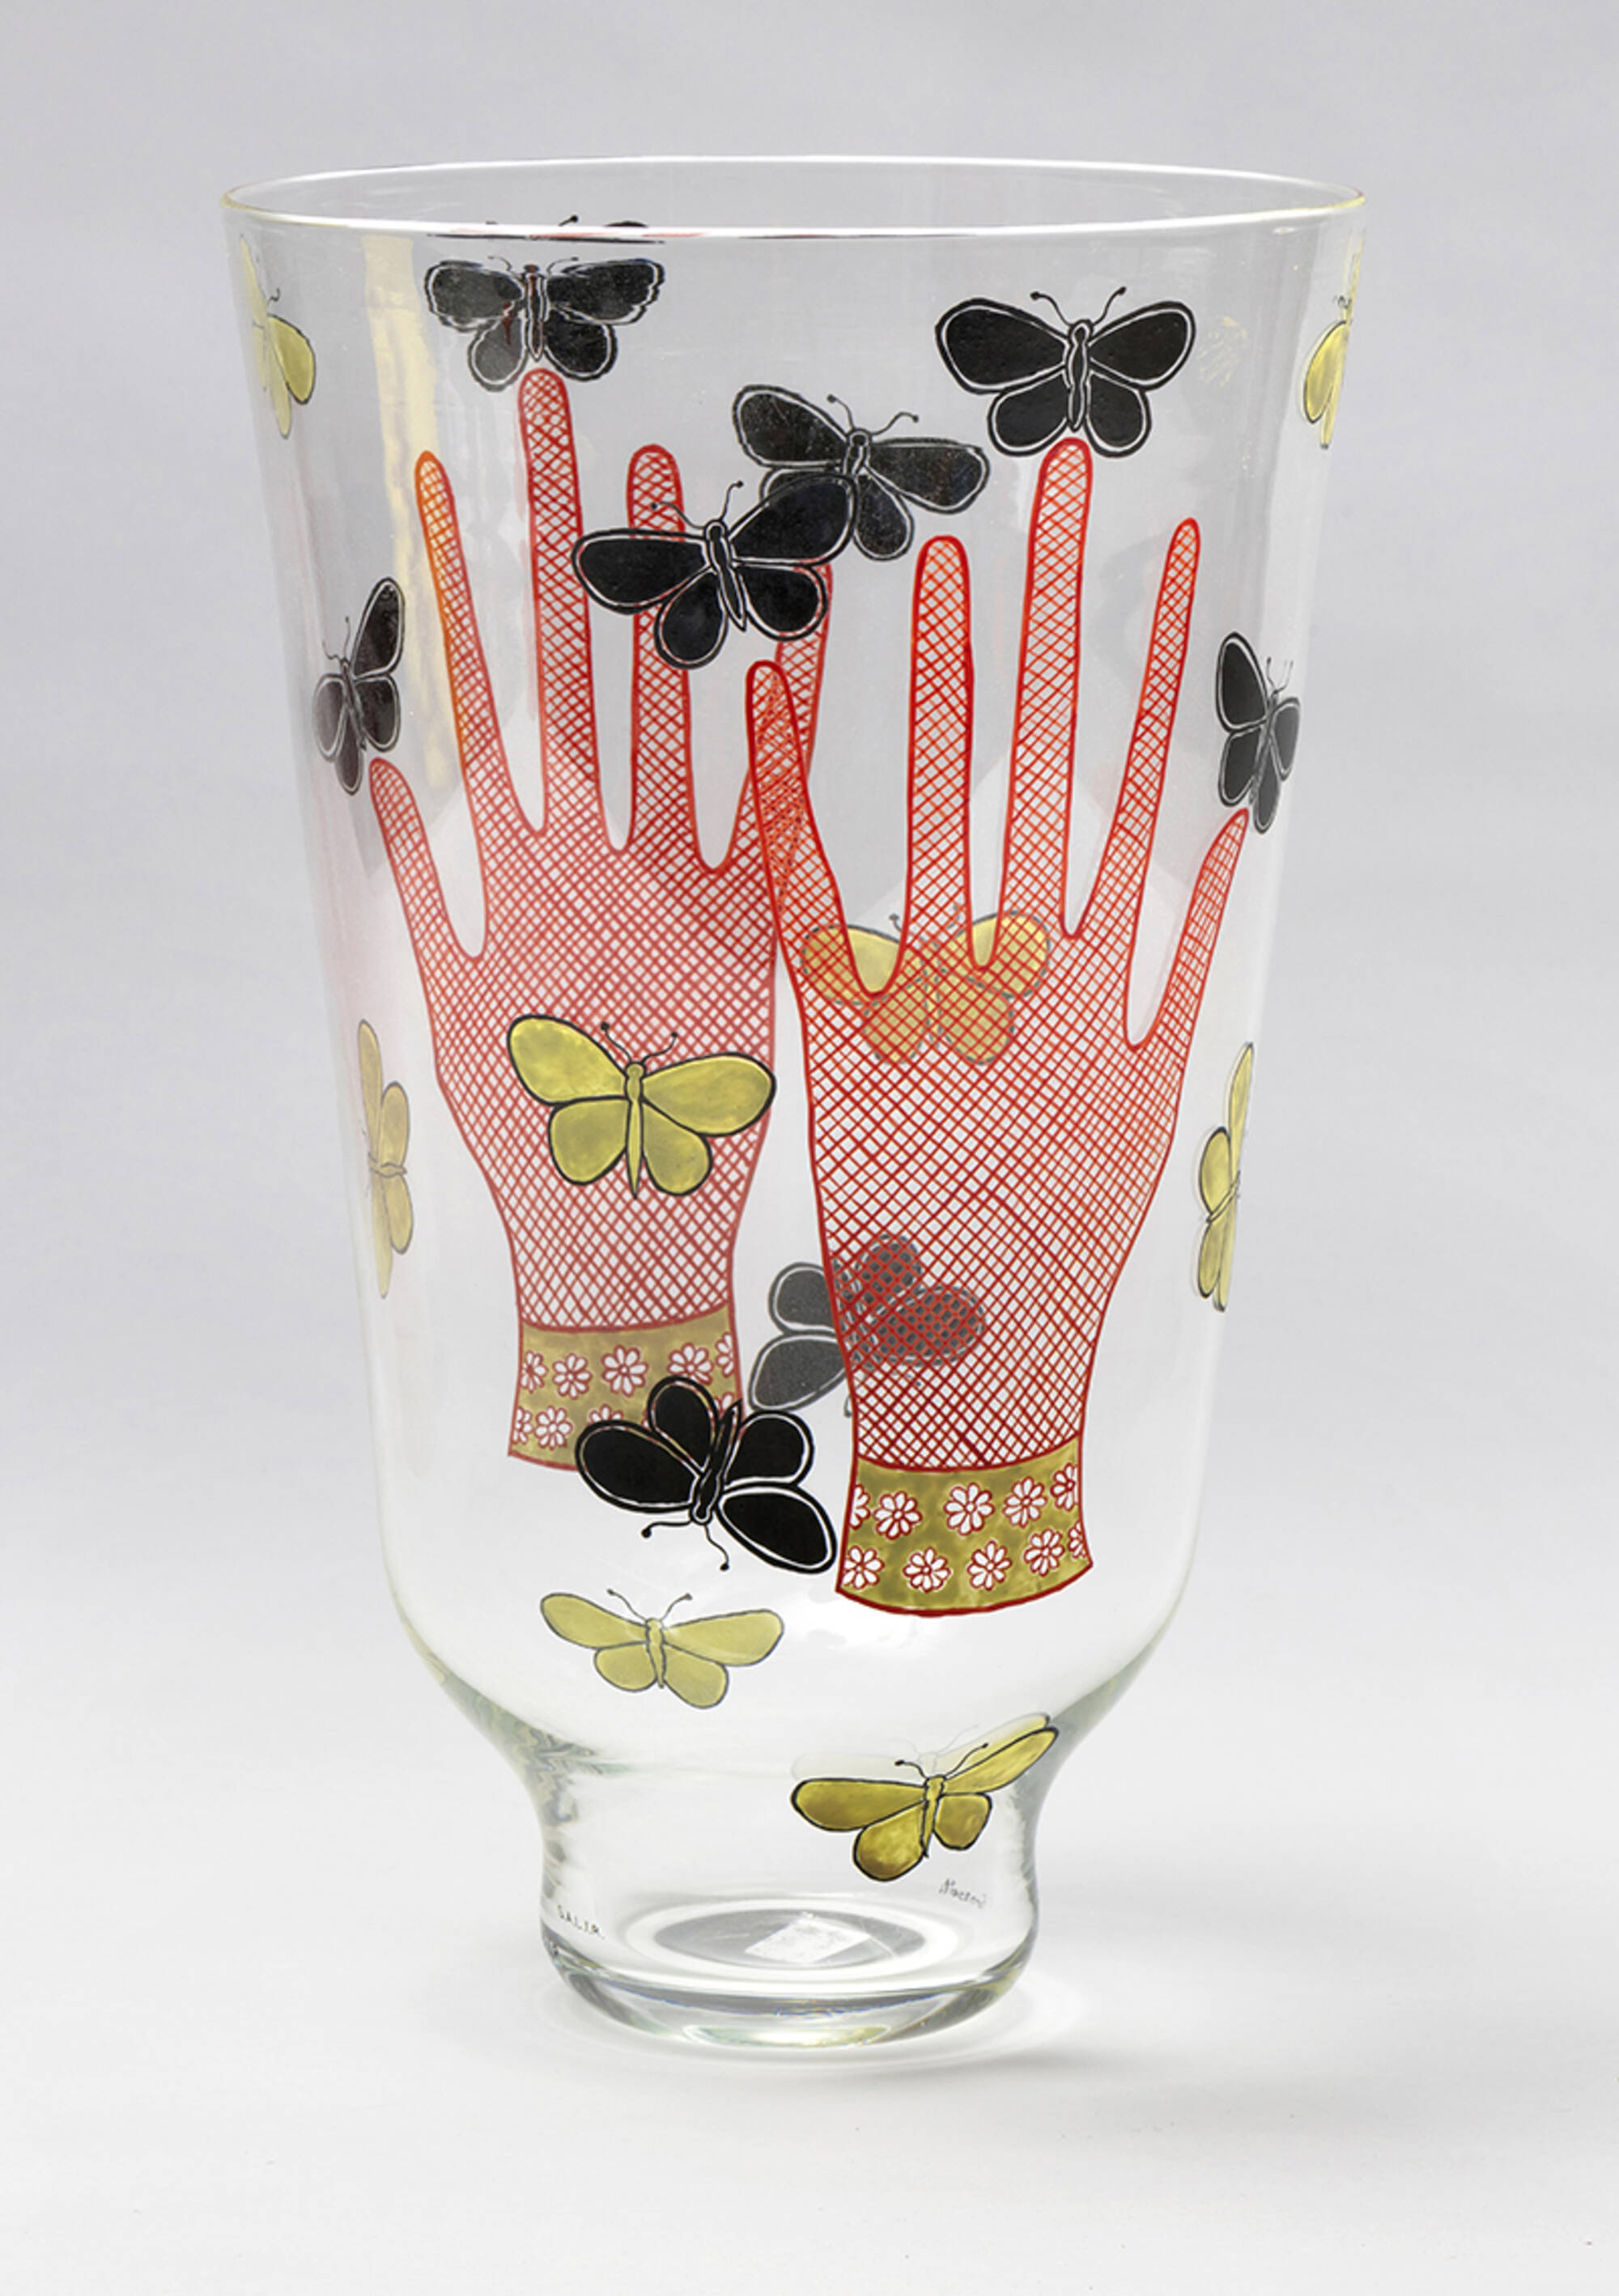 52: PIERO FORNASETTI, Tema e Variazioni group (14) < Timed Online Only, 14  June 2020 < Auctions